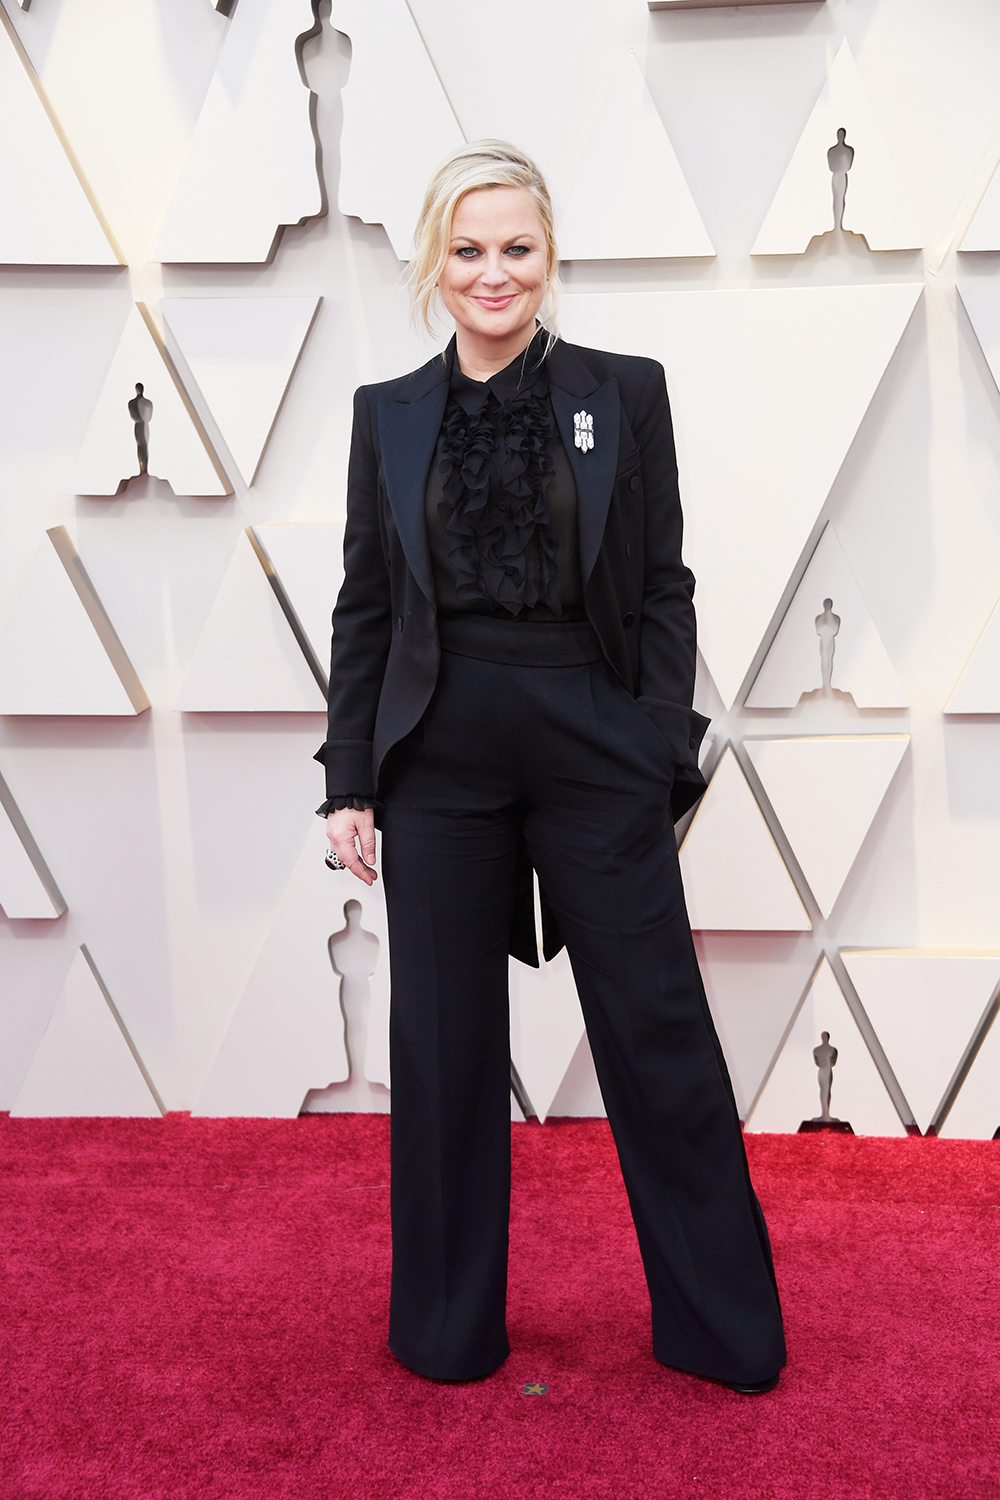 HOLLYWOOD, CALIFORNIA - FEBRUARY 24: Amy Poehler attends the 91st Annual Academy Awards at Hollywood and Highland on February 24, 2019 in Hollywood, California. (Photo by Frazer Harrison/Getty Images)